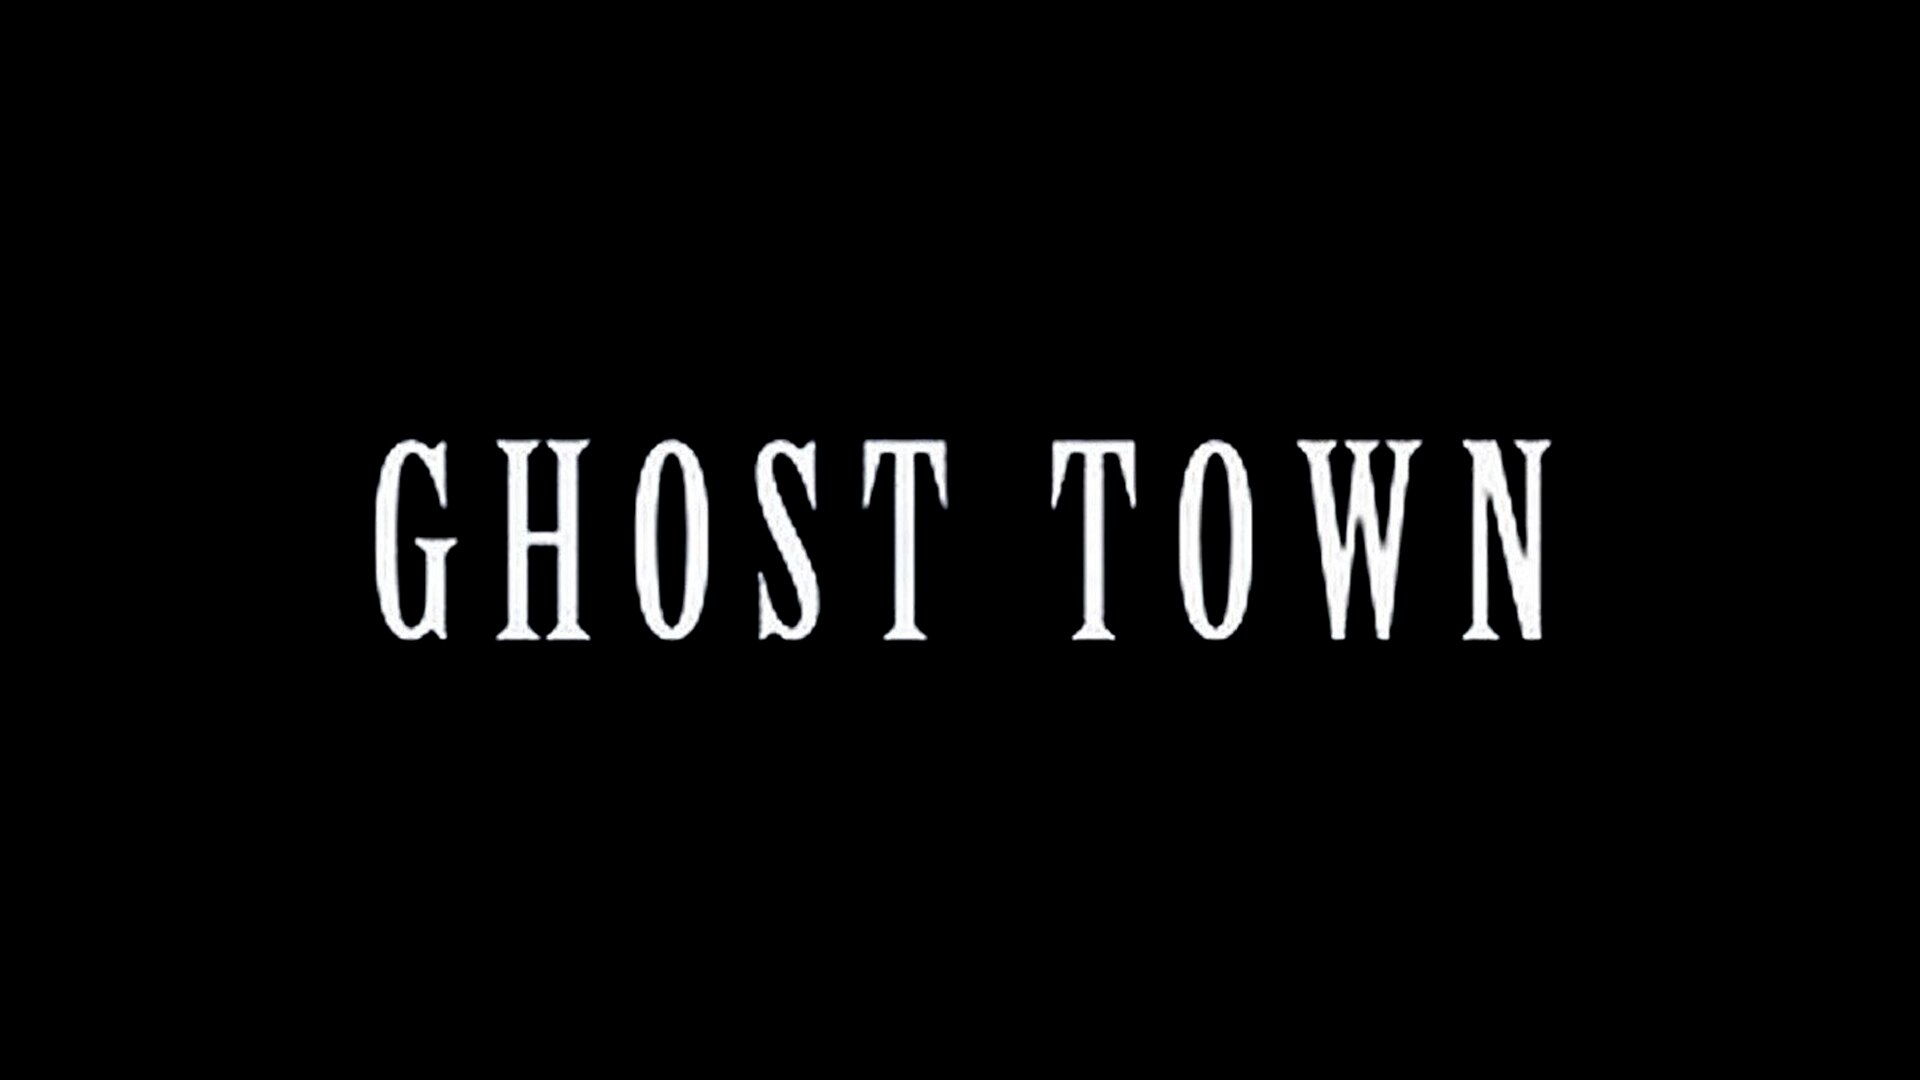 word ghost town